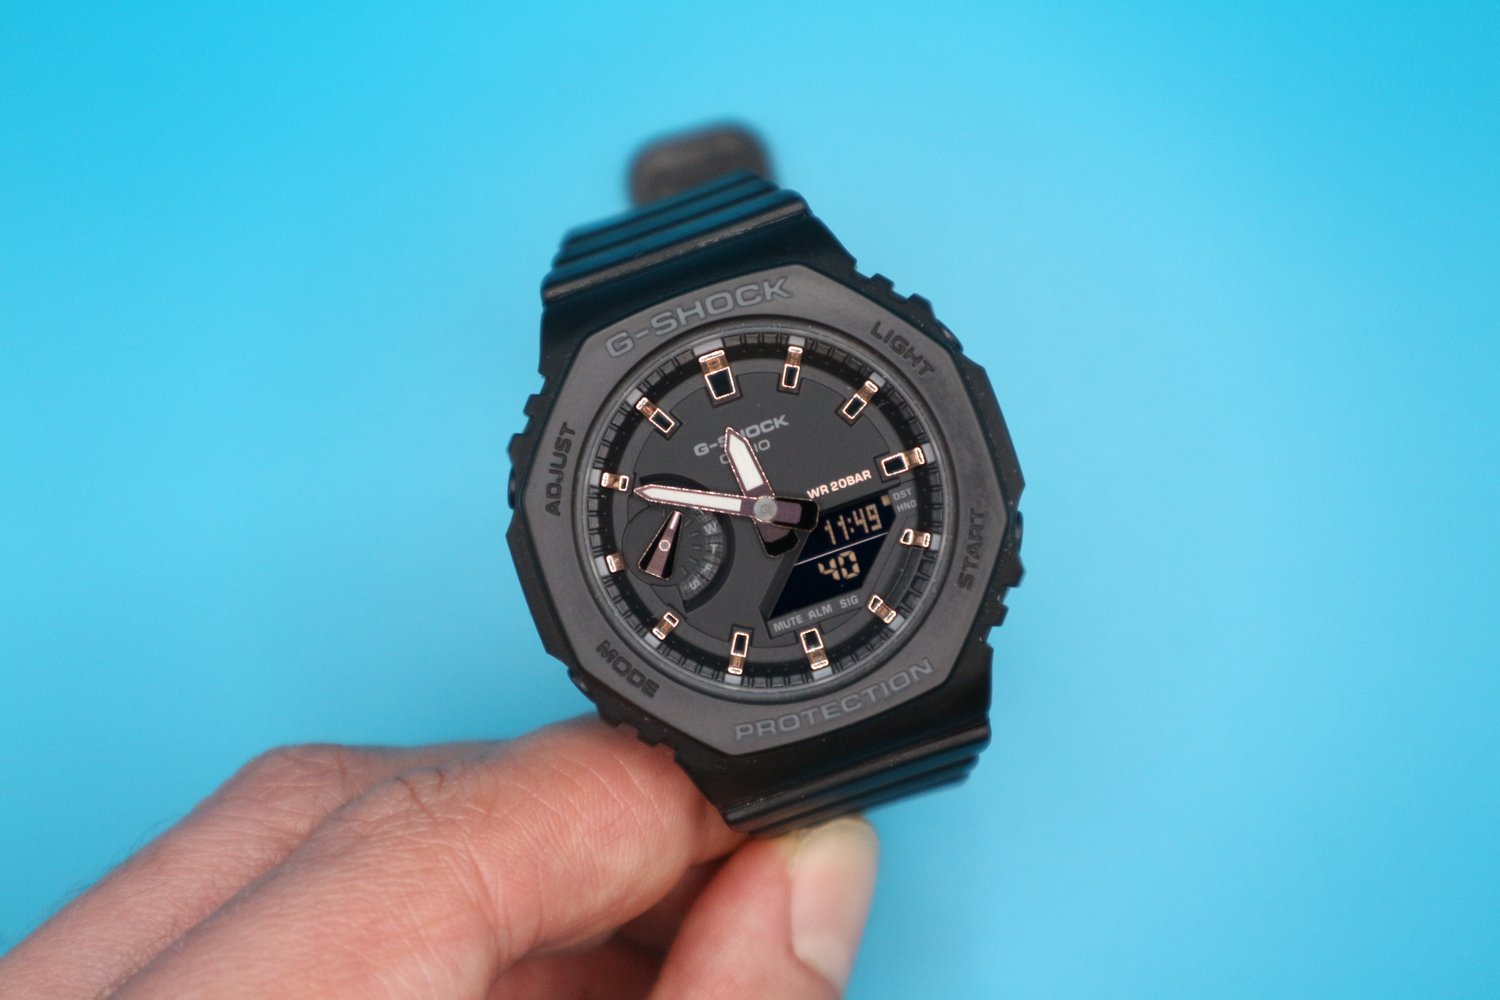 Worth — It TheWatchMuse \'CasiOak\' G-Shock Is Still Buying? Review: GA-2100 Casio